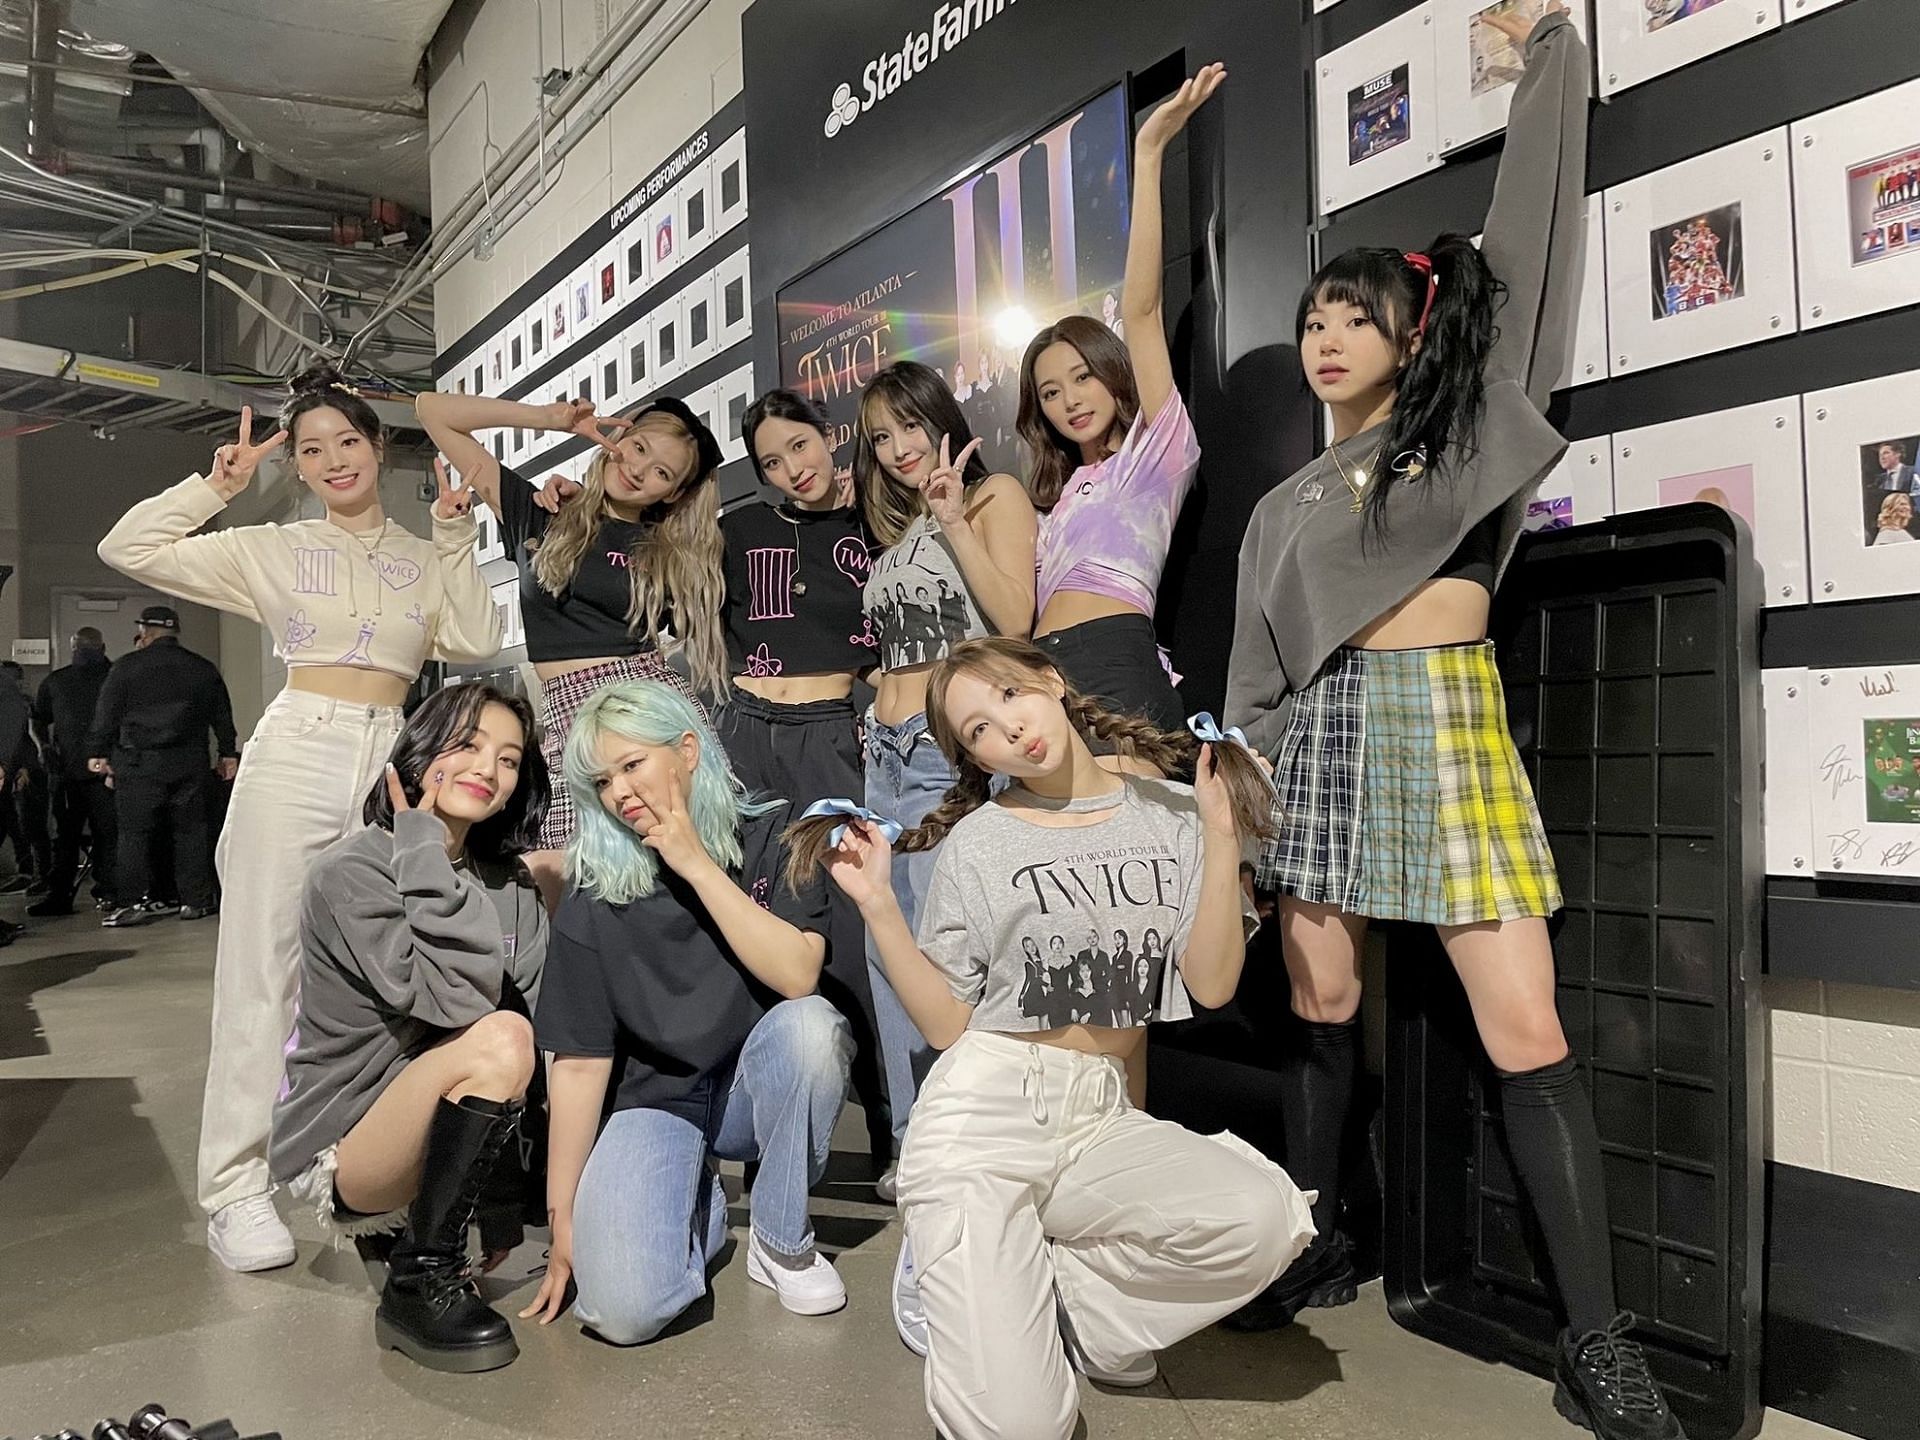 The group at their 4th World Tour in Atlanta (Image via @JYPETWICE)